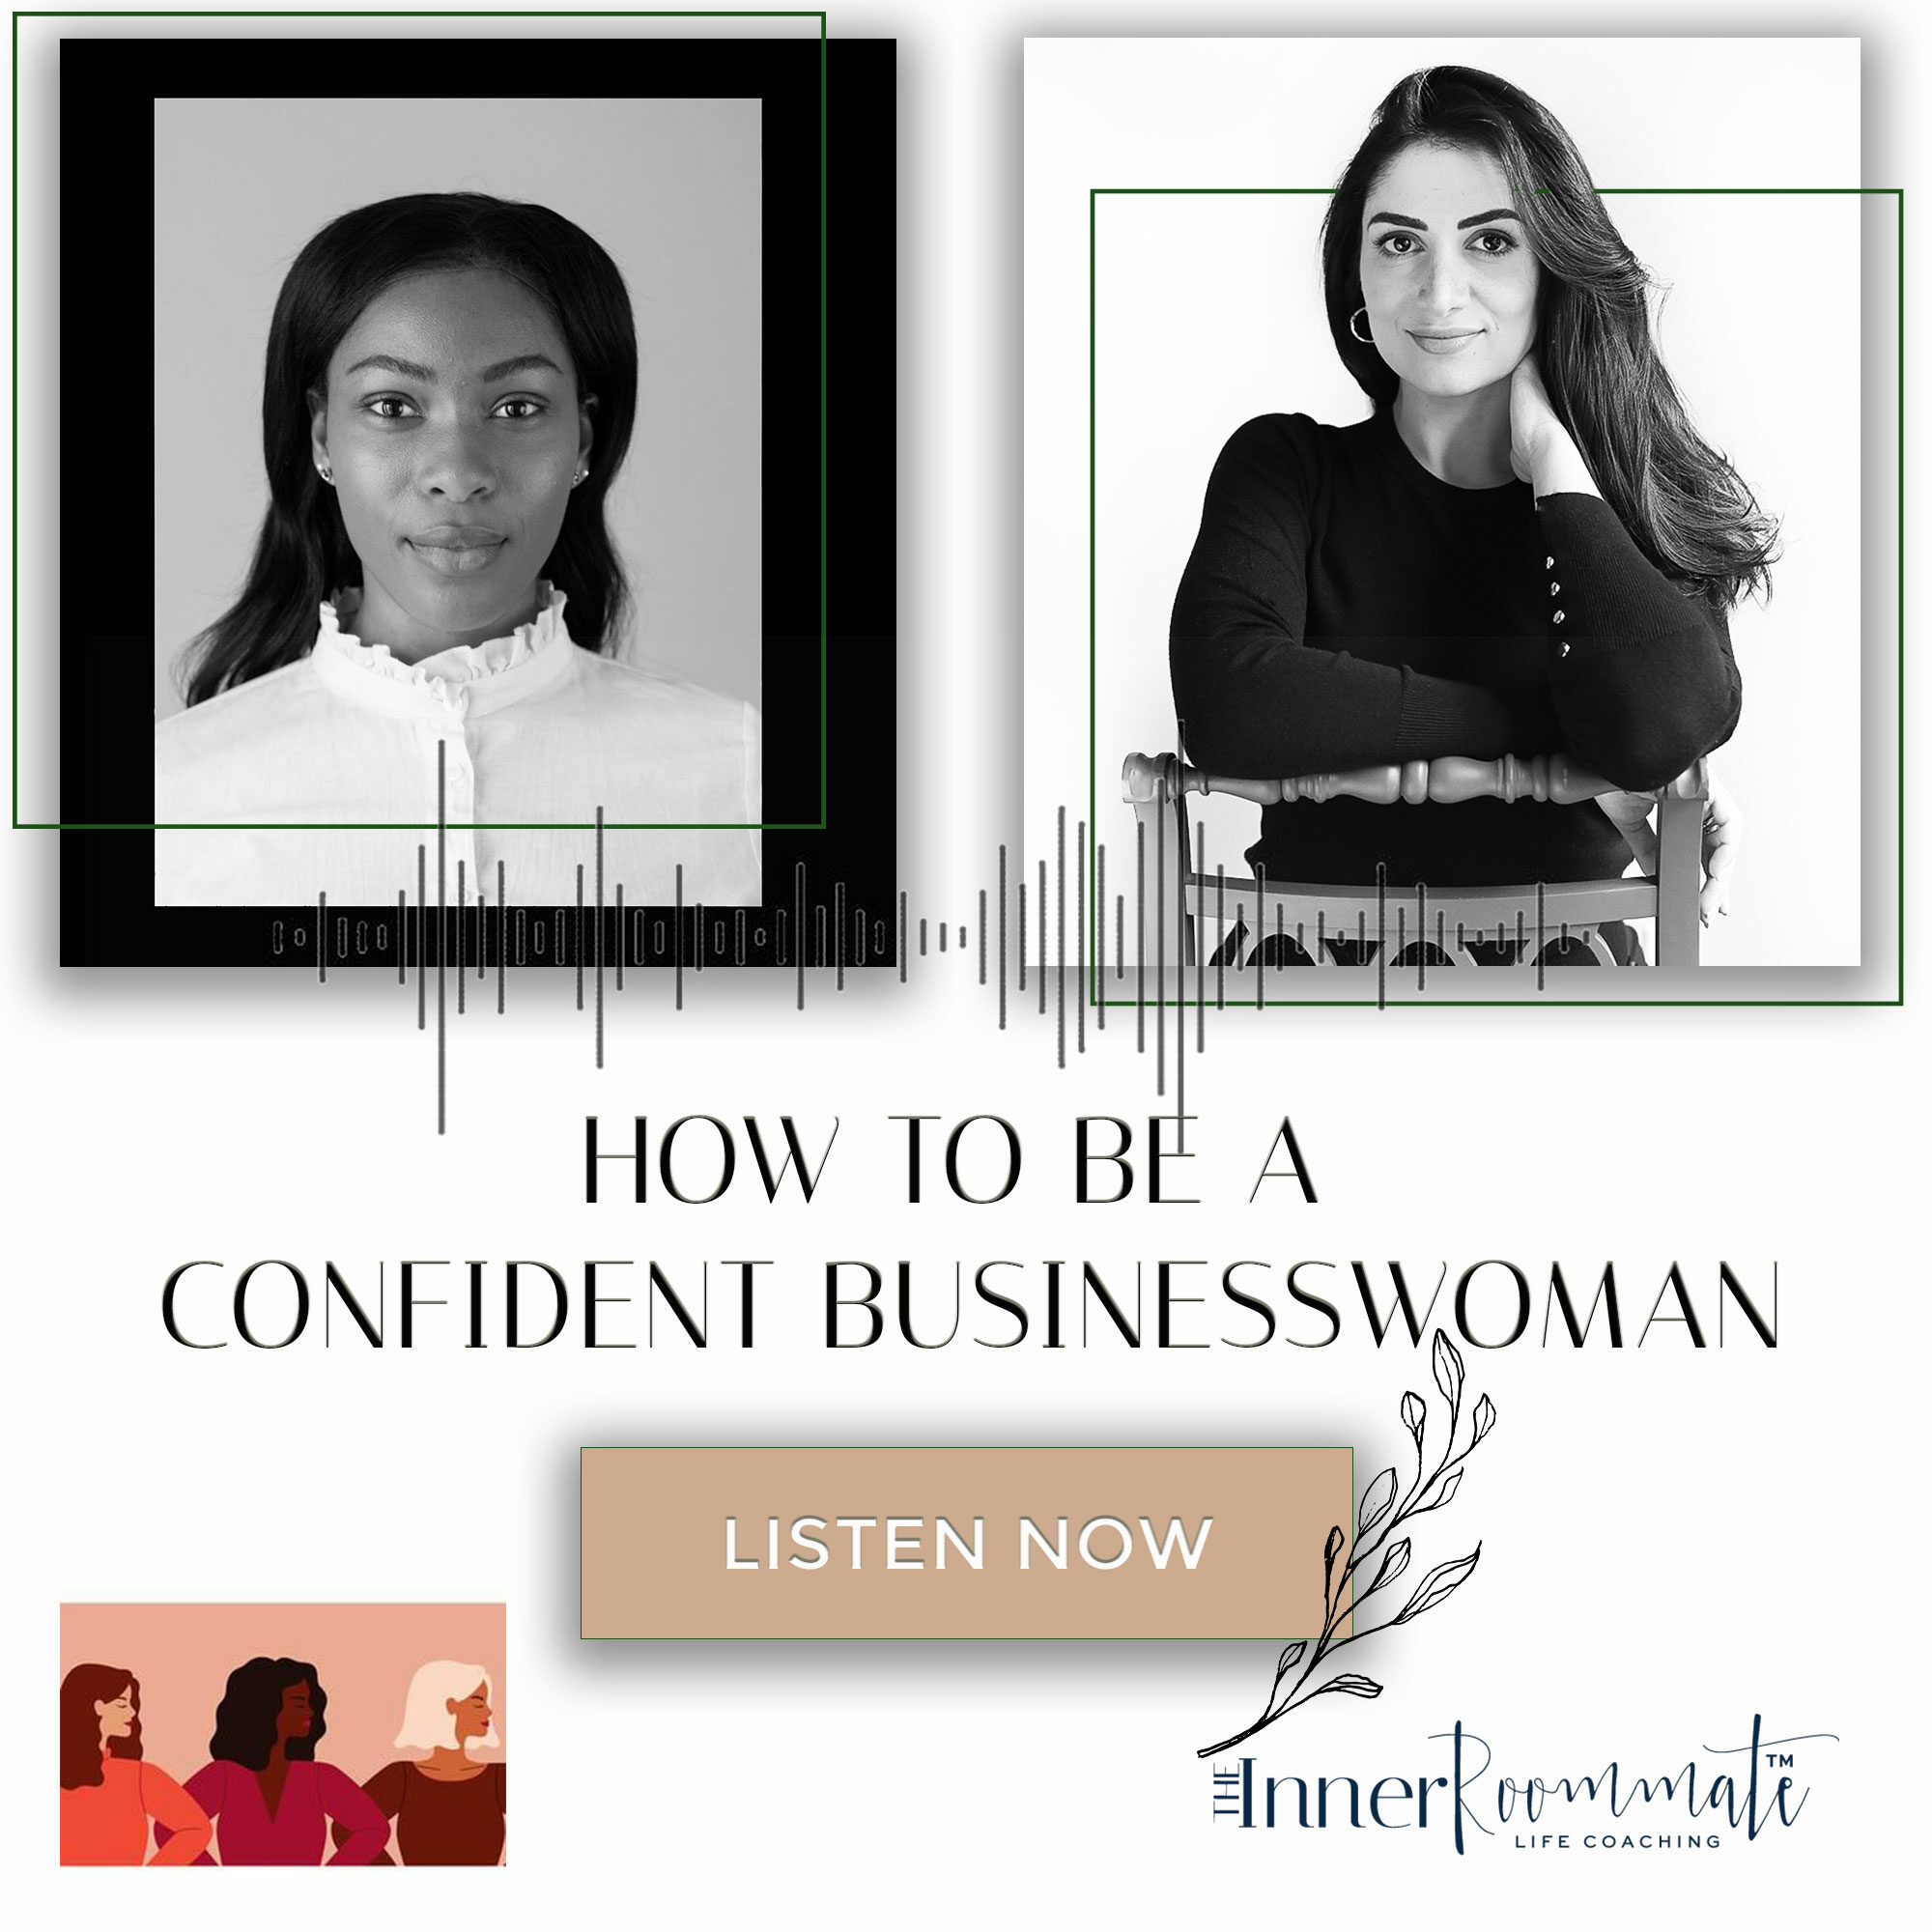 Tune in to listen to us speak about how you can be a confident businesswoman 